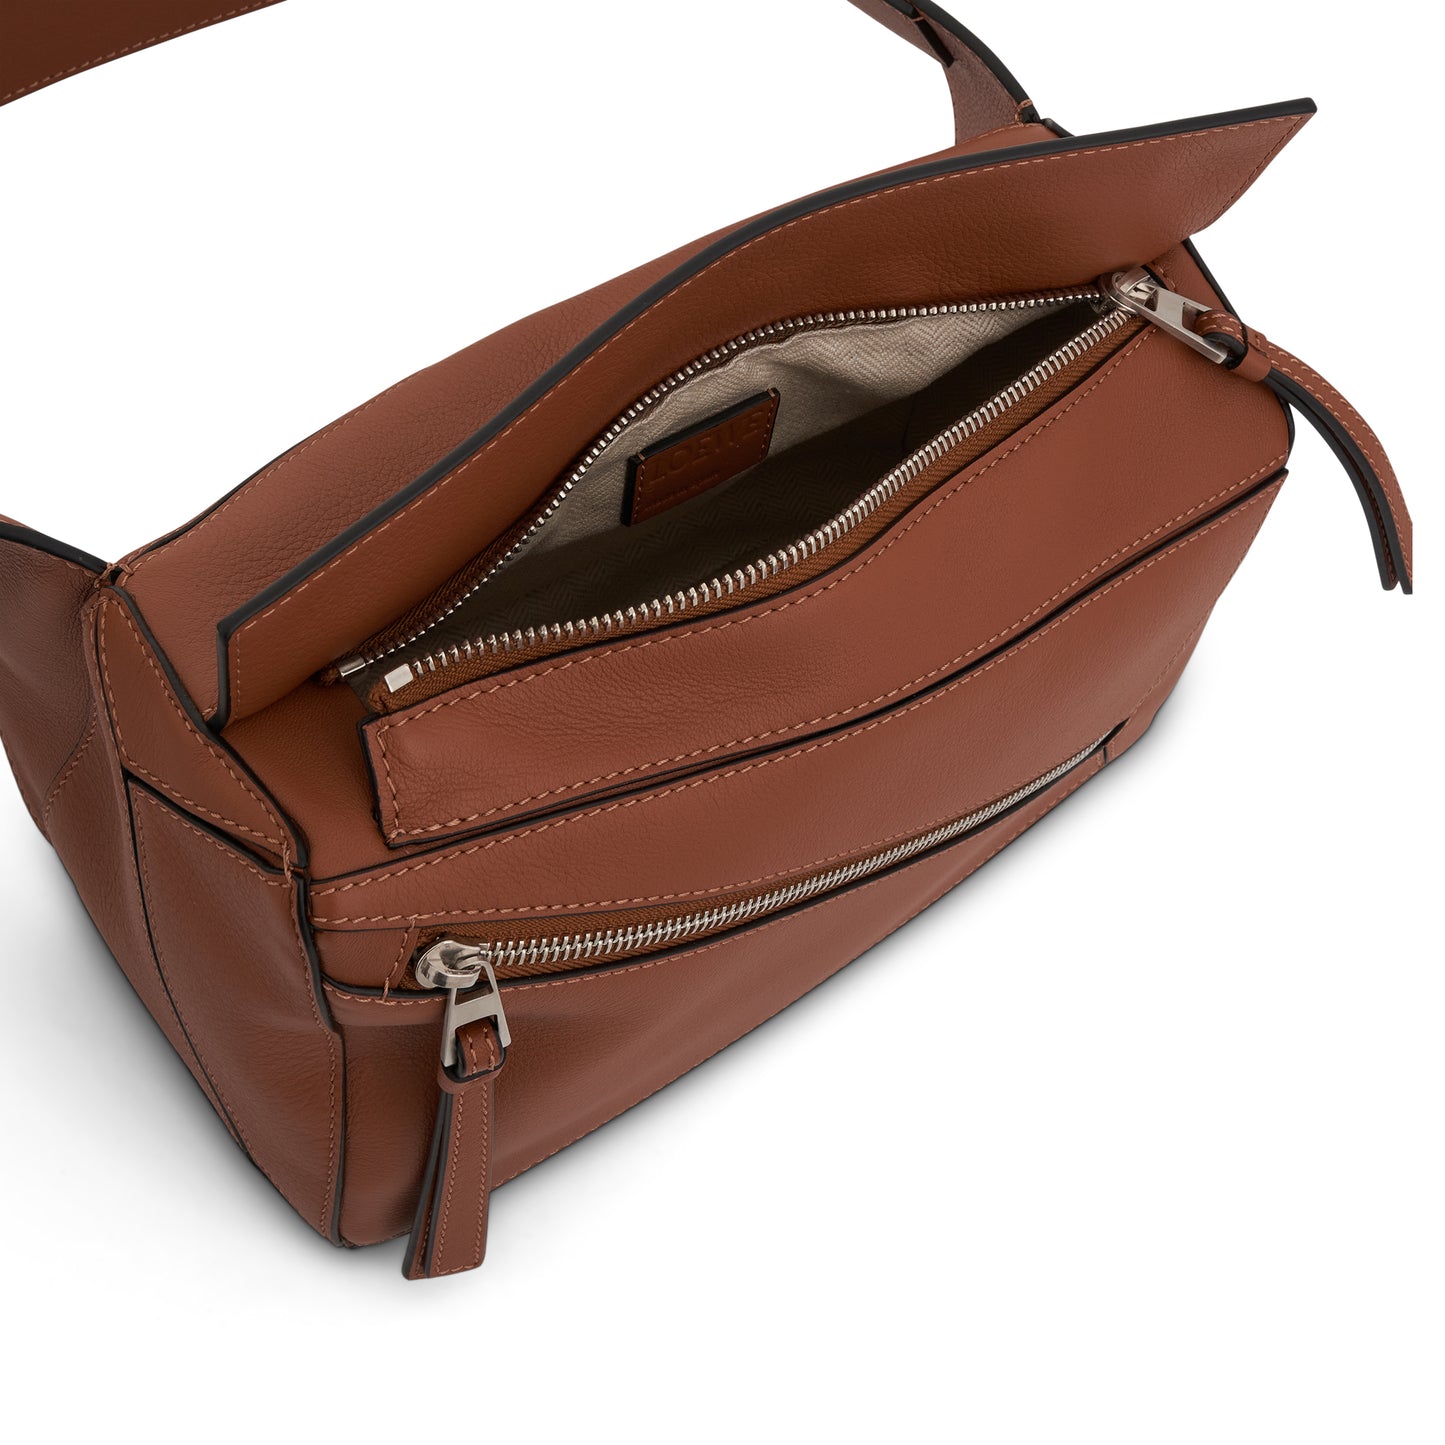 Small Puzzle Bumbag in Classic Calfskin in Tan